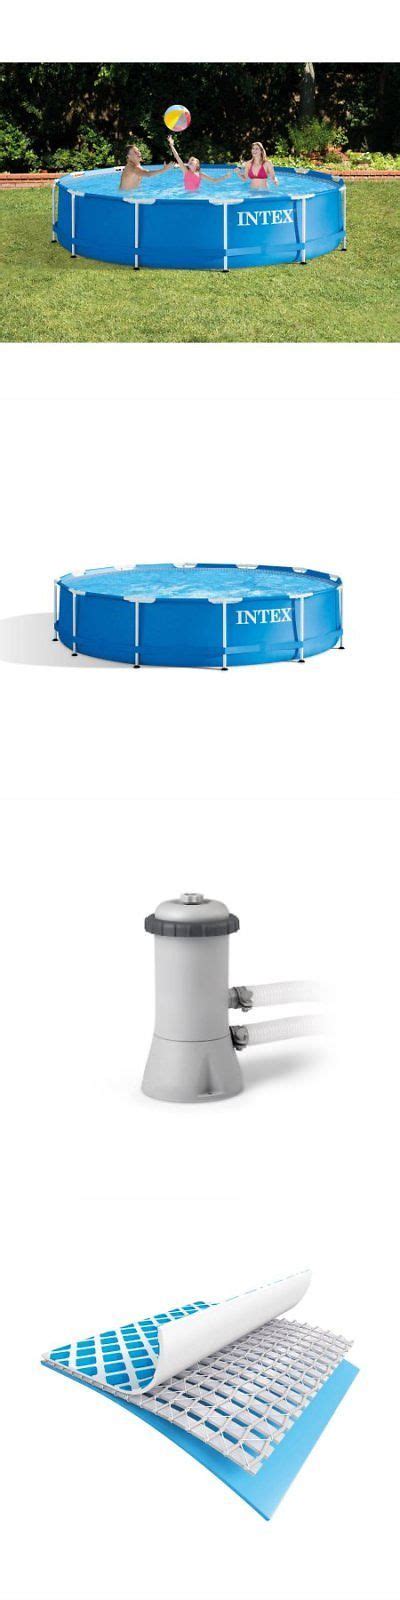 Intex 12 X 30 Metal Frame Above Ground Swimming Pool With Filter